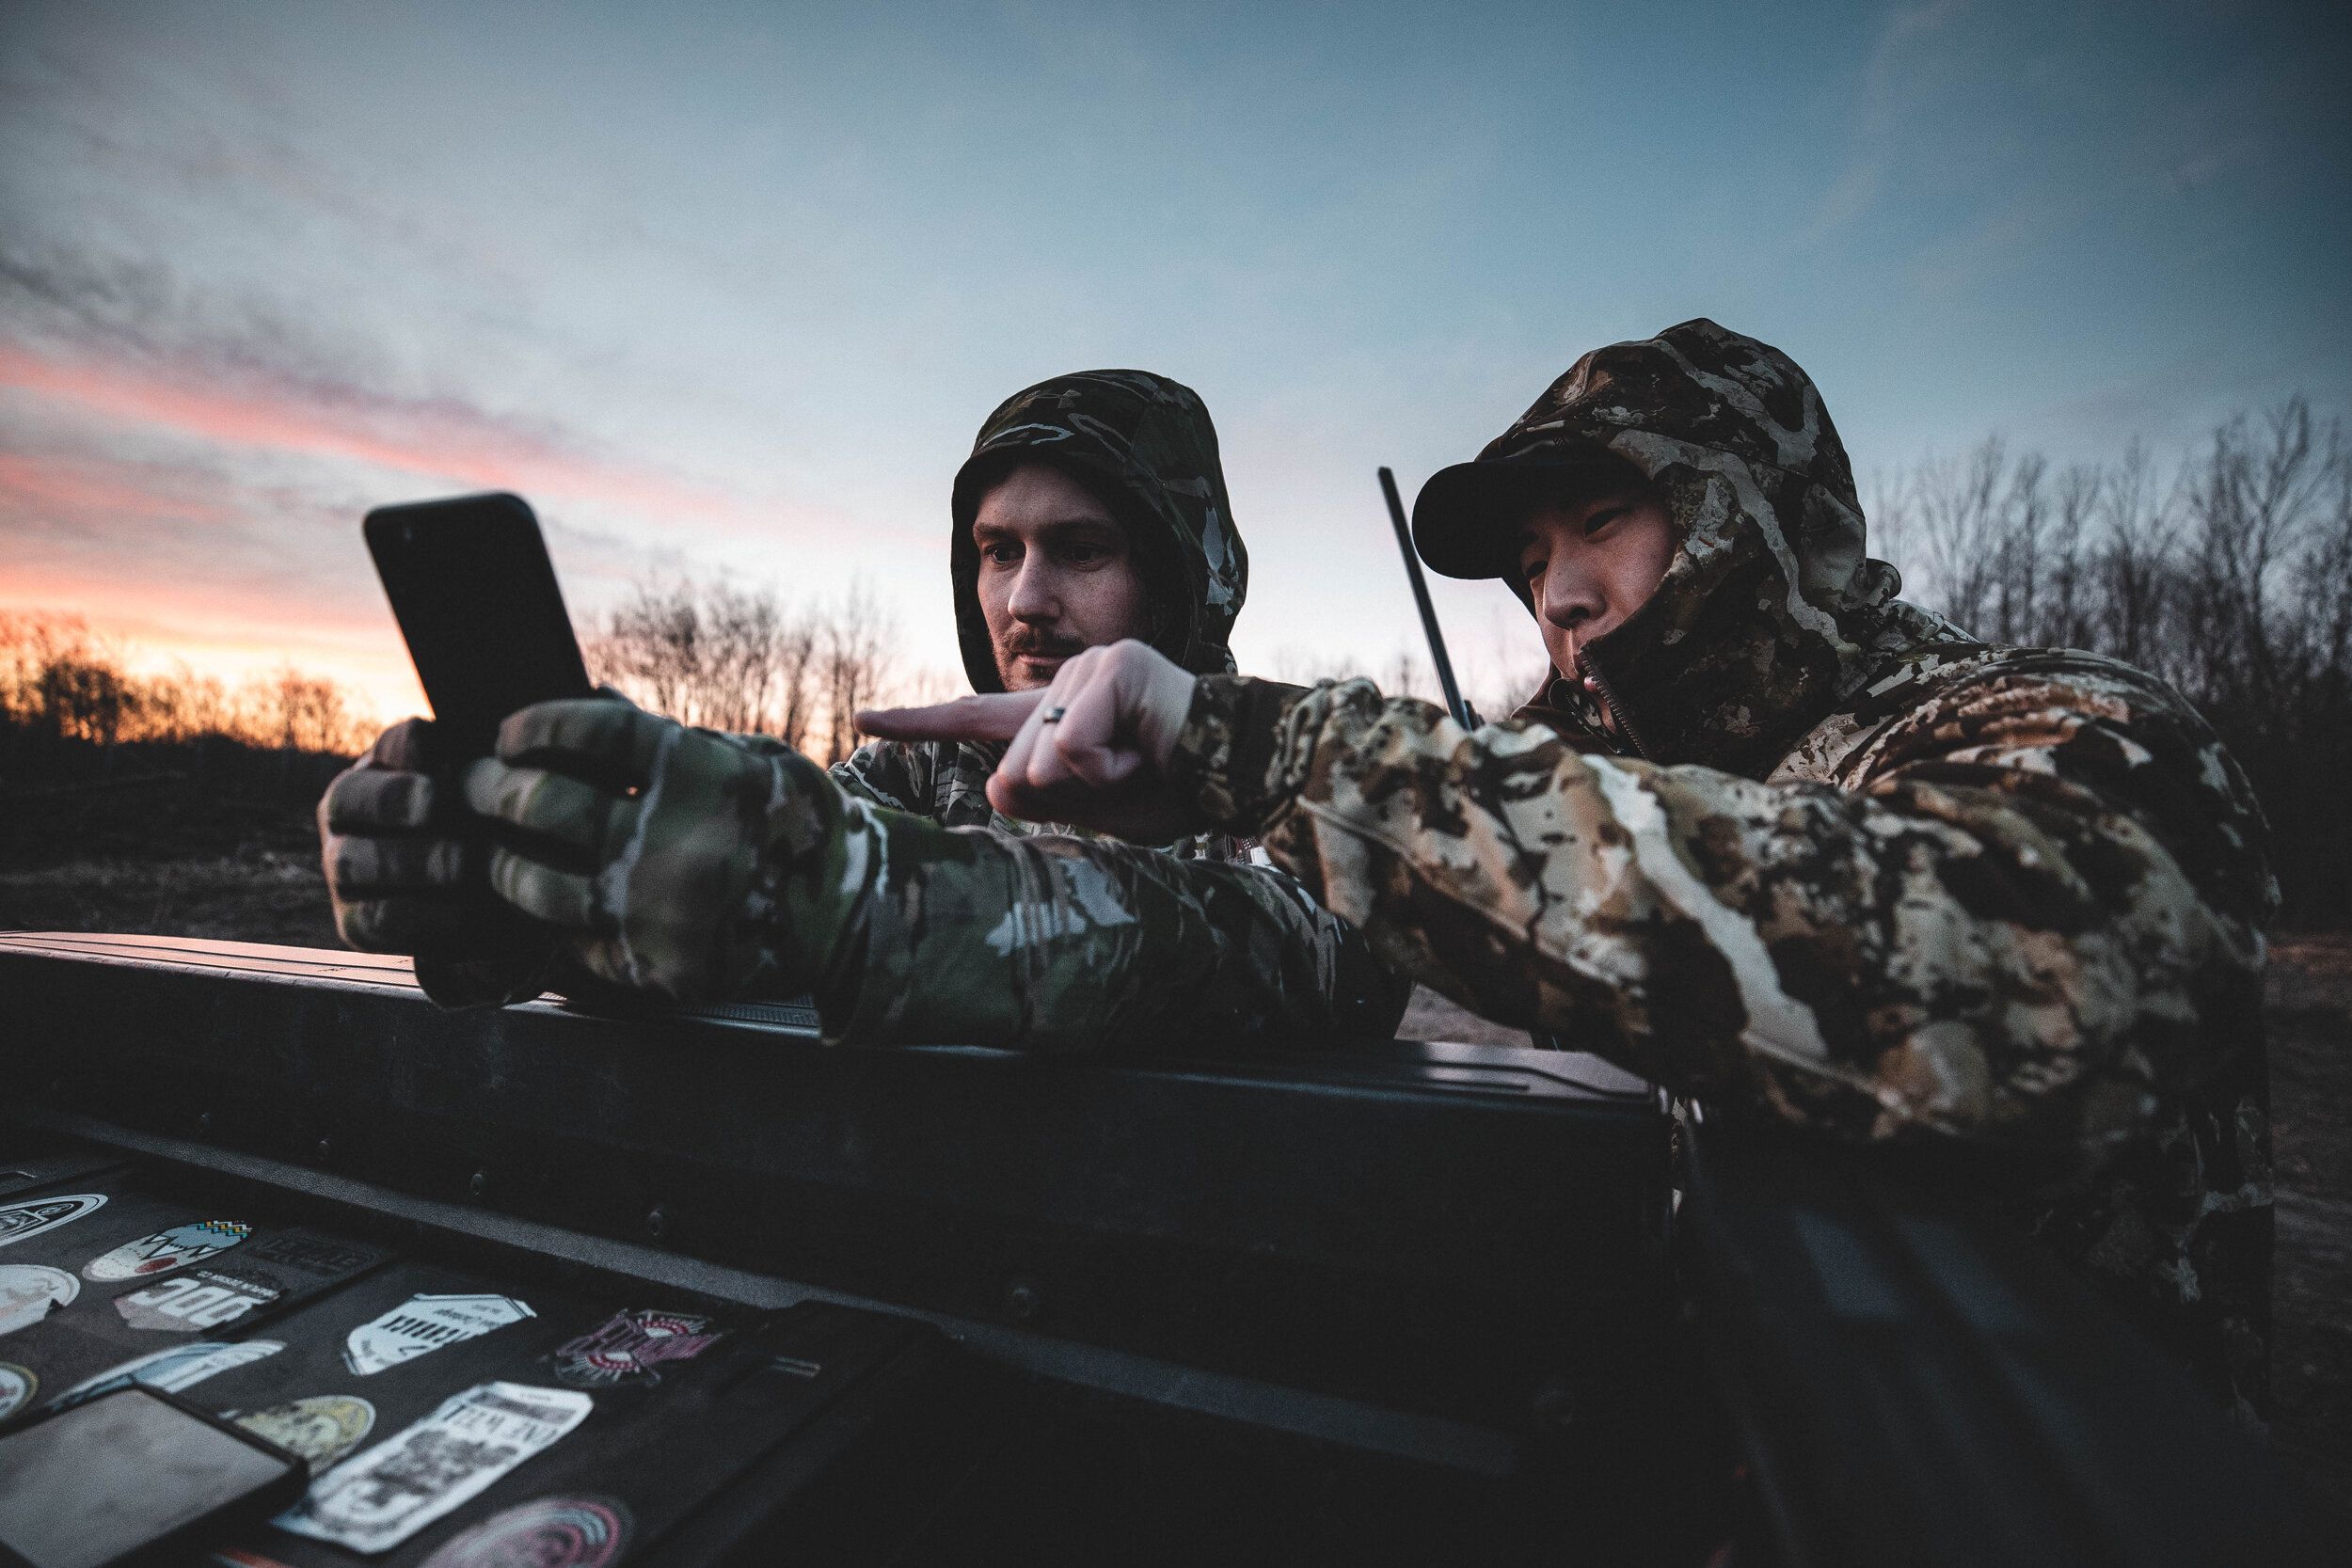 Hunters use the HuntWise app, get an hunting license in Arkansas concept. 